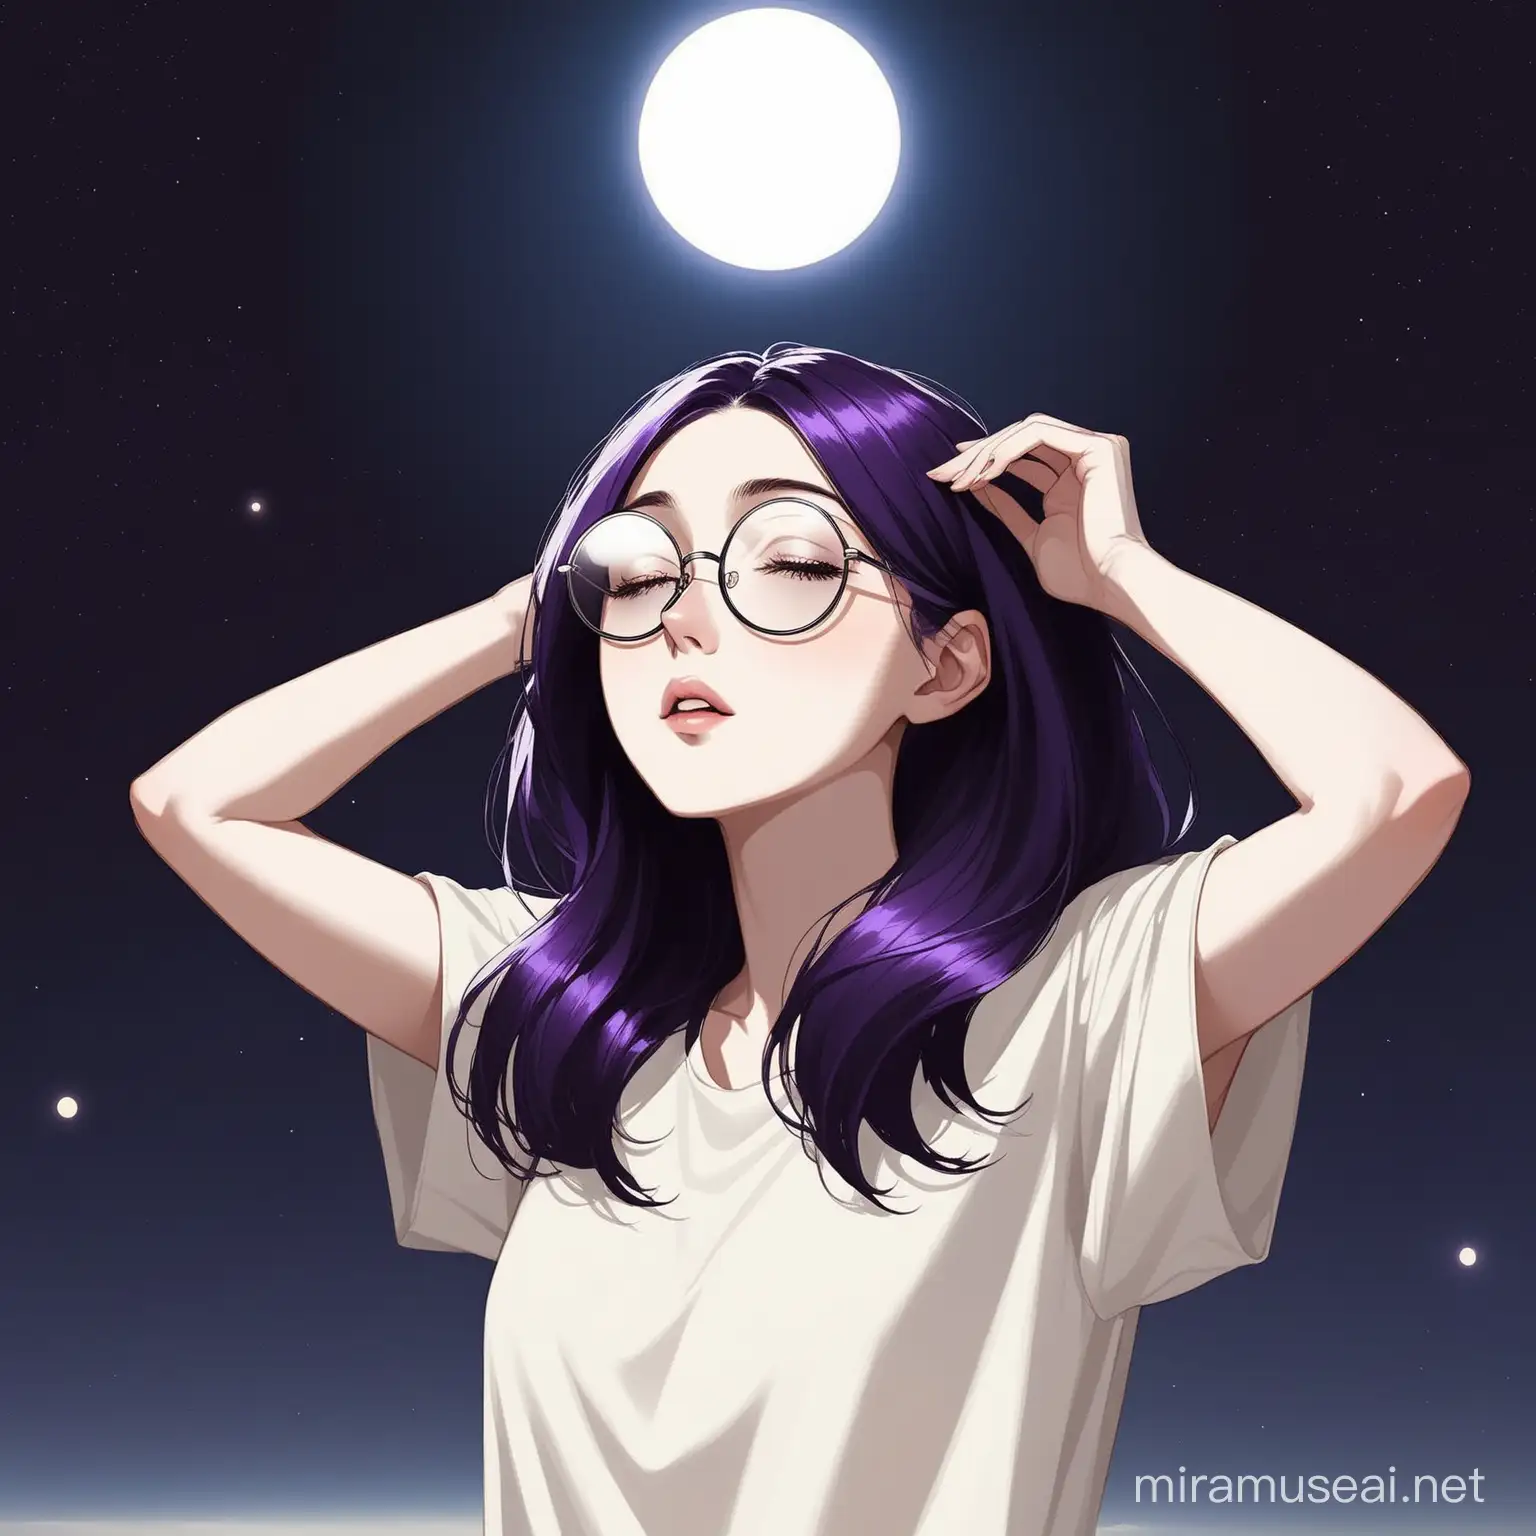 pale white woman with dark purple hair and round glasses during total eclipse